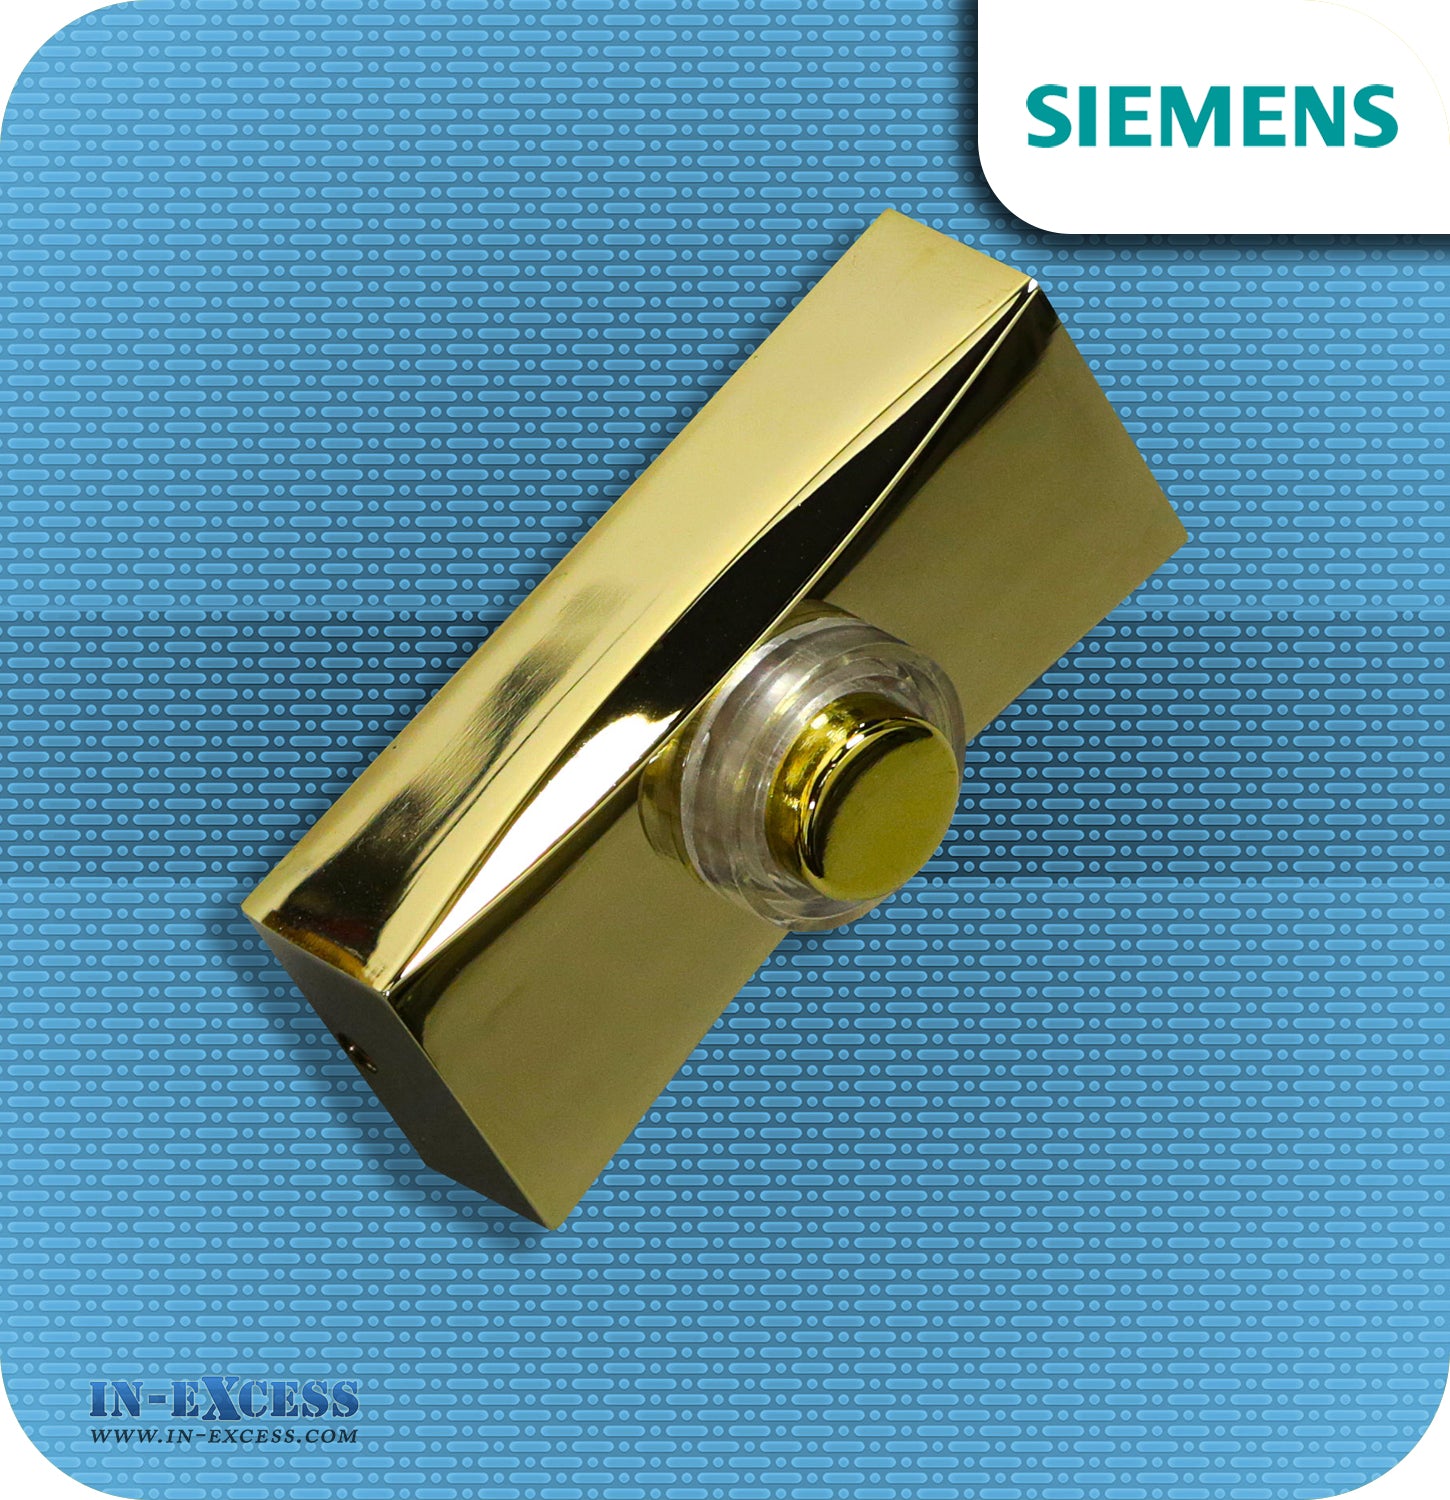 Siemens Brass Effect Wired Bell Push For Wired Door Chimes - JSJS-312 (DCW15)